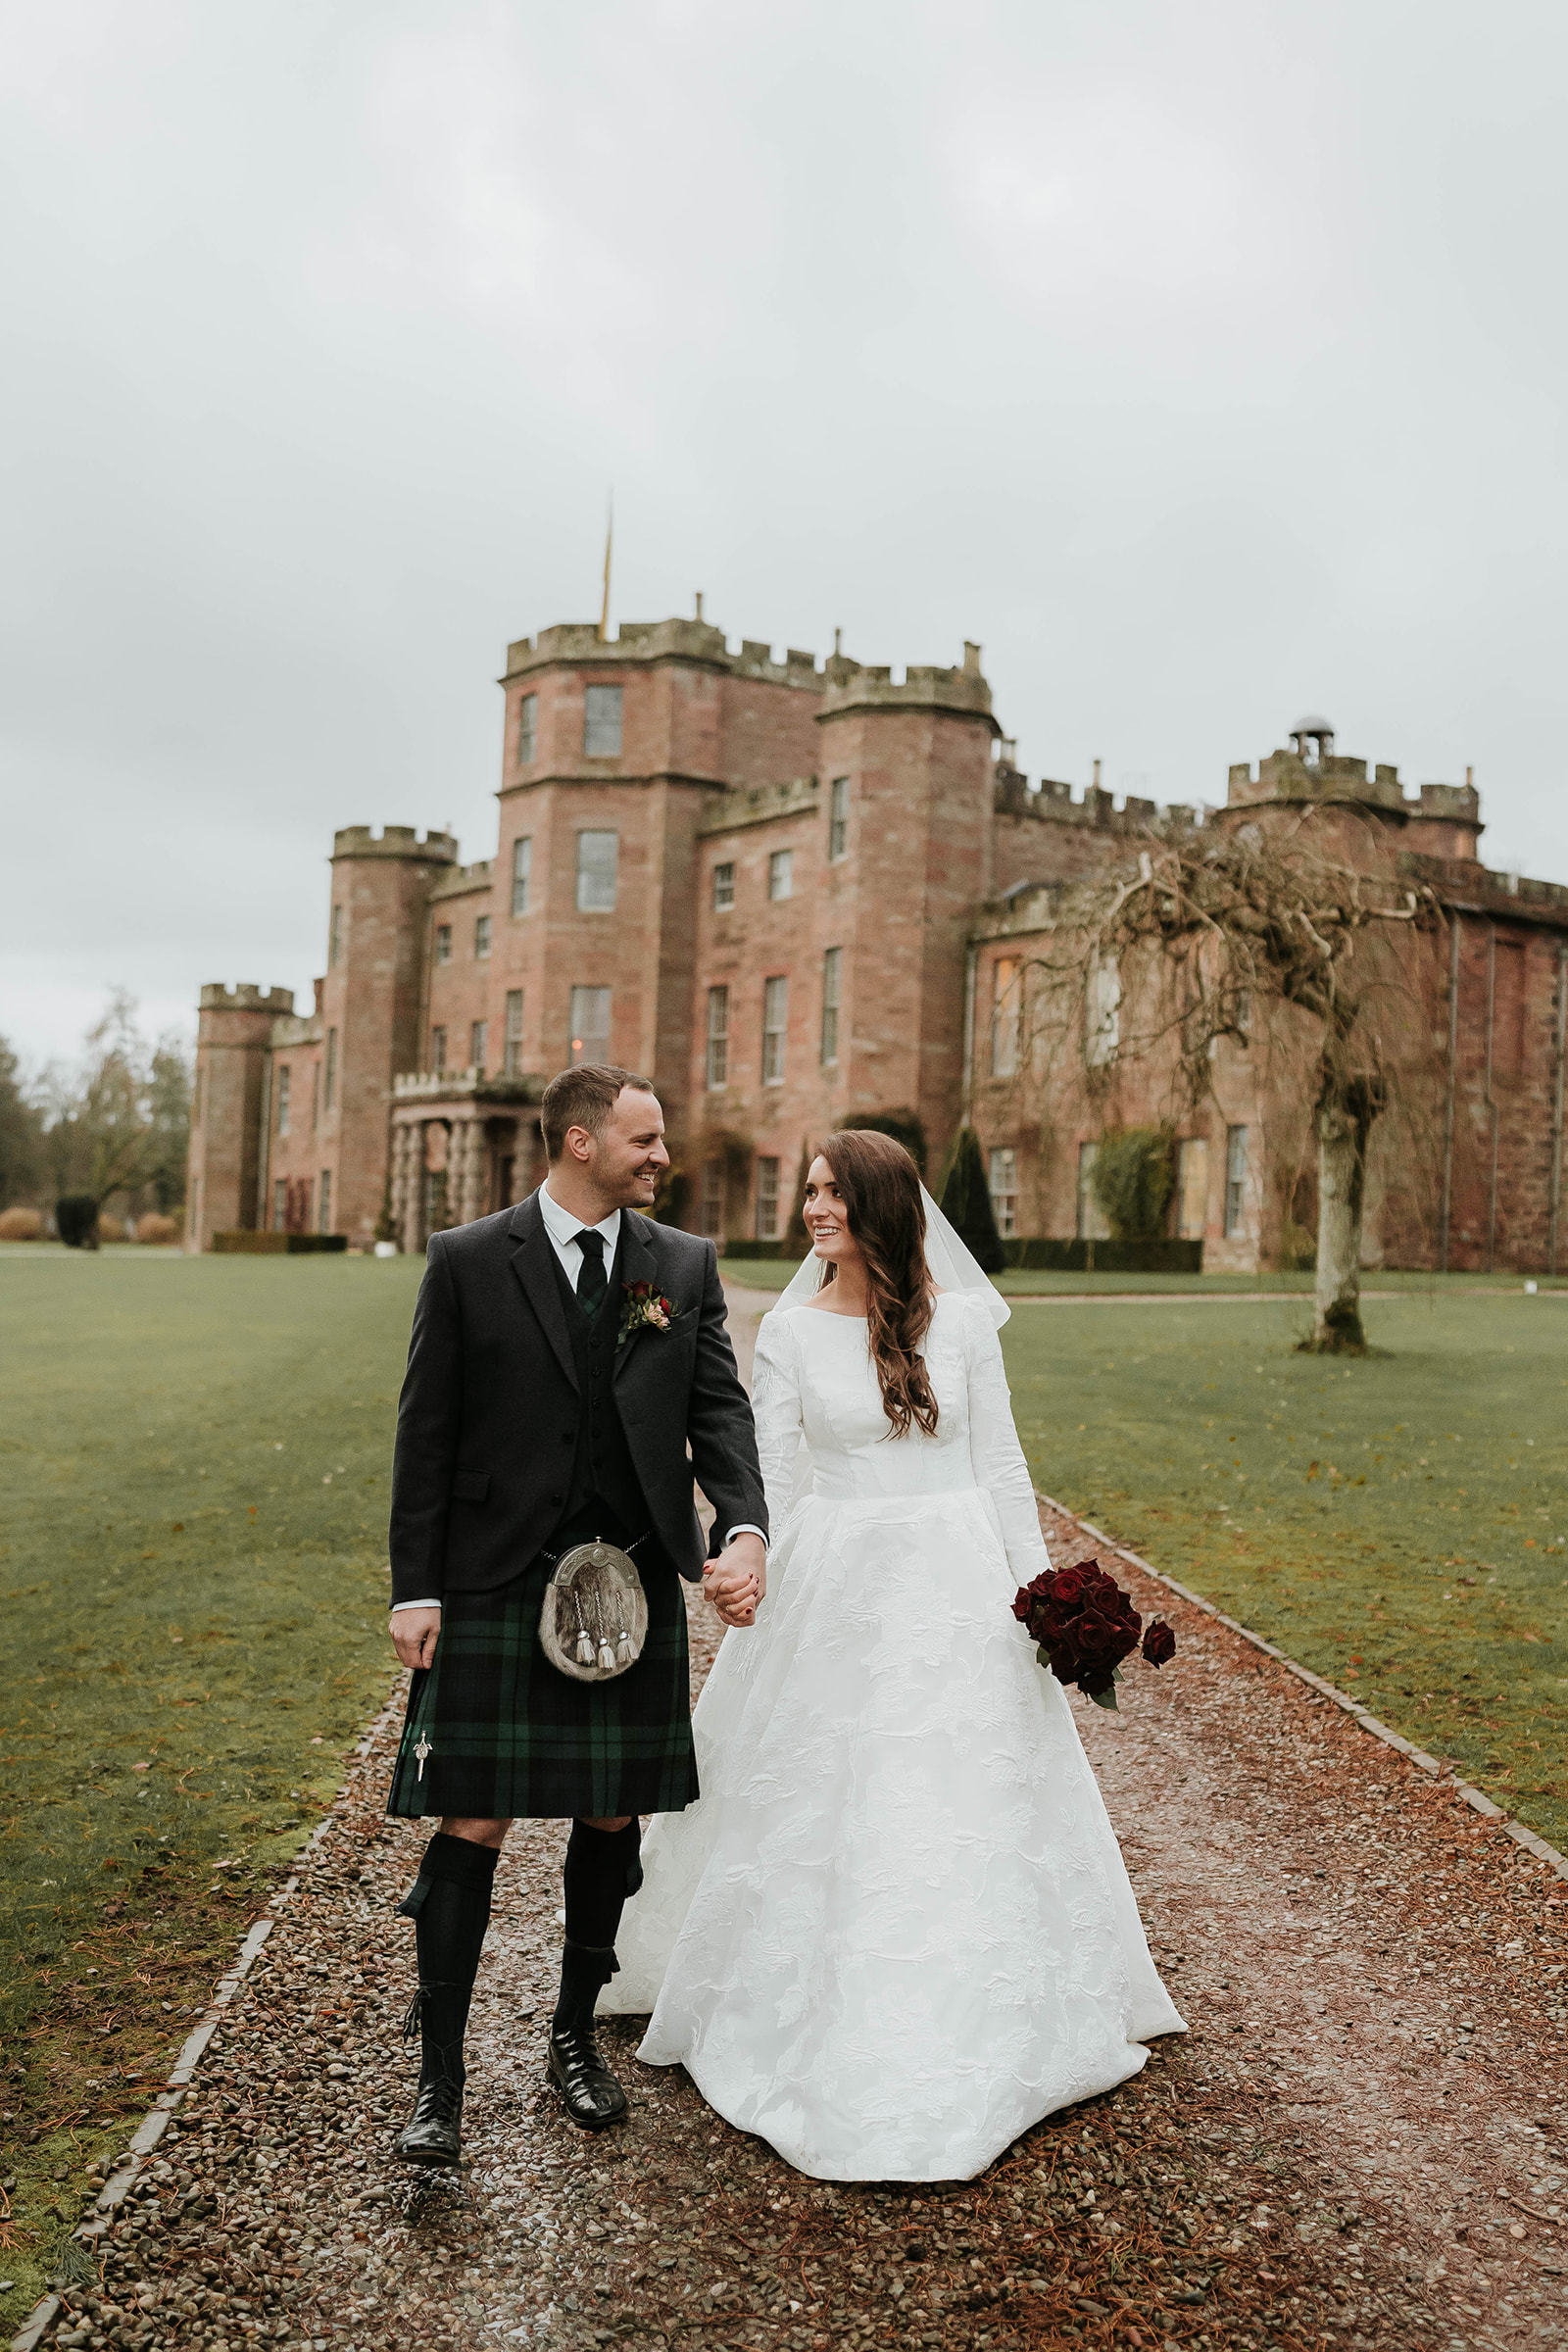 A couple who married at a scottish castle in Fettercairn